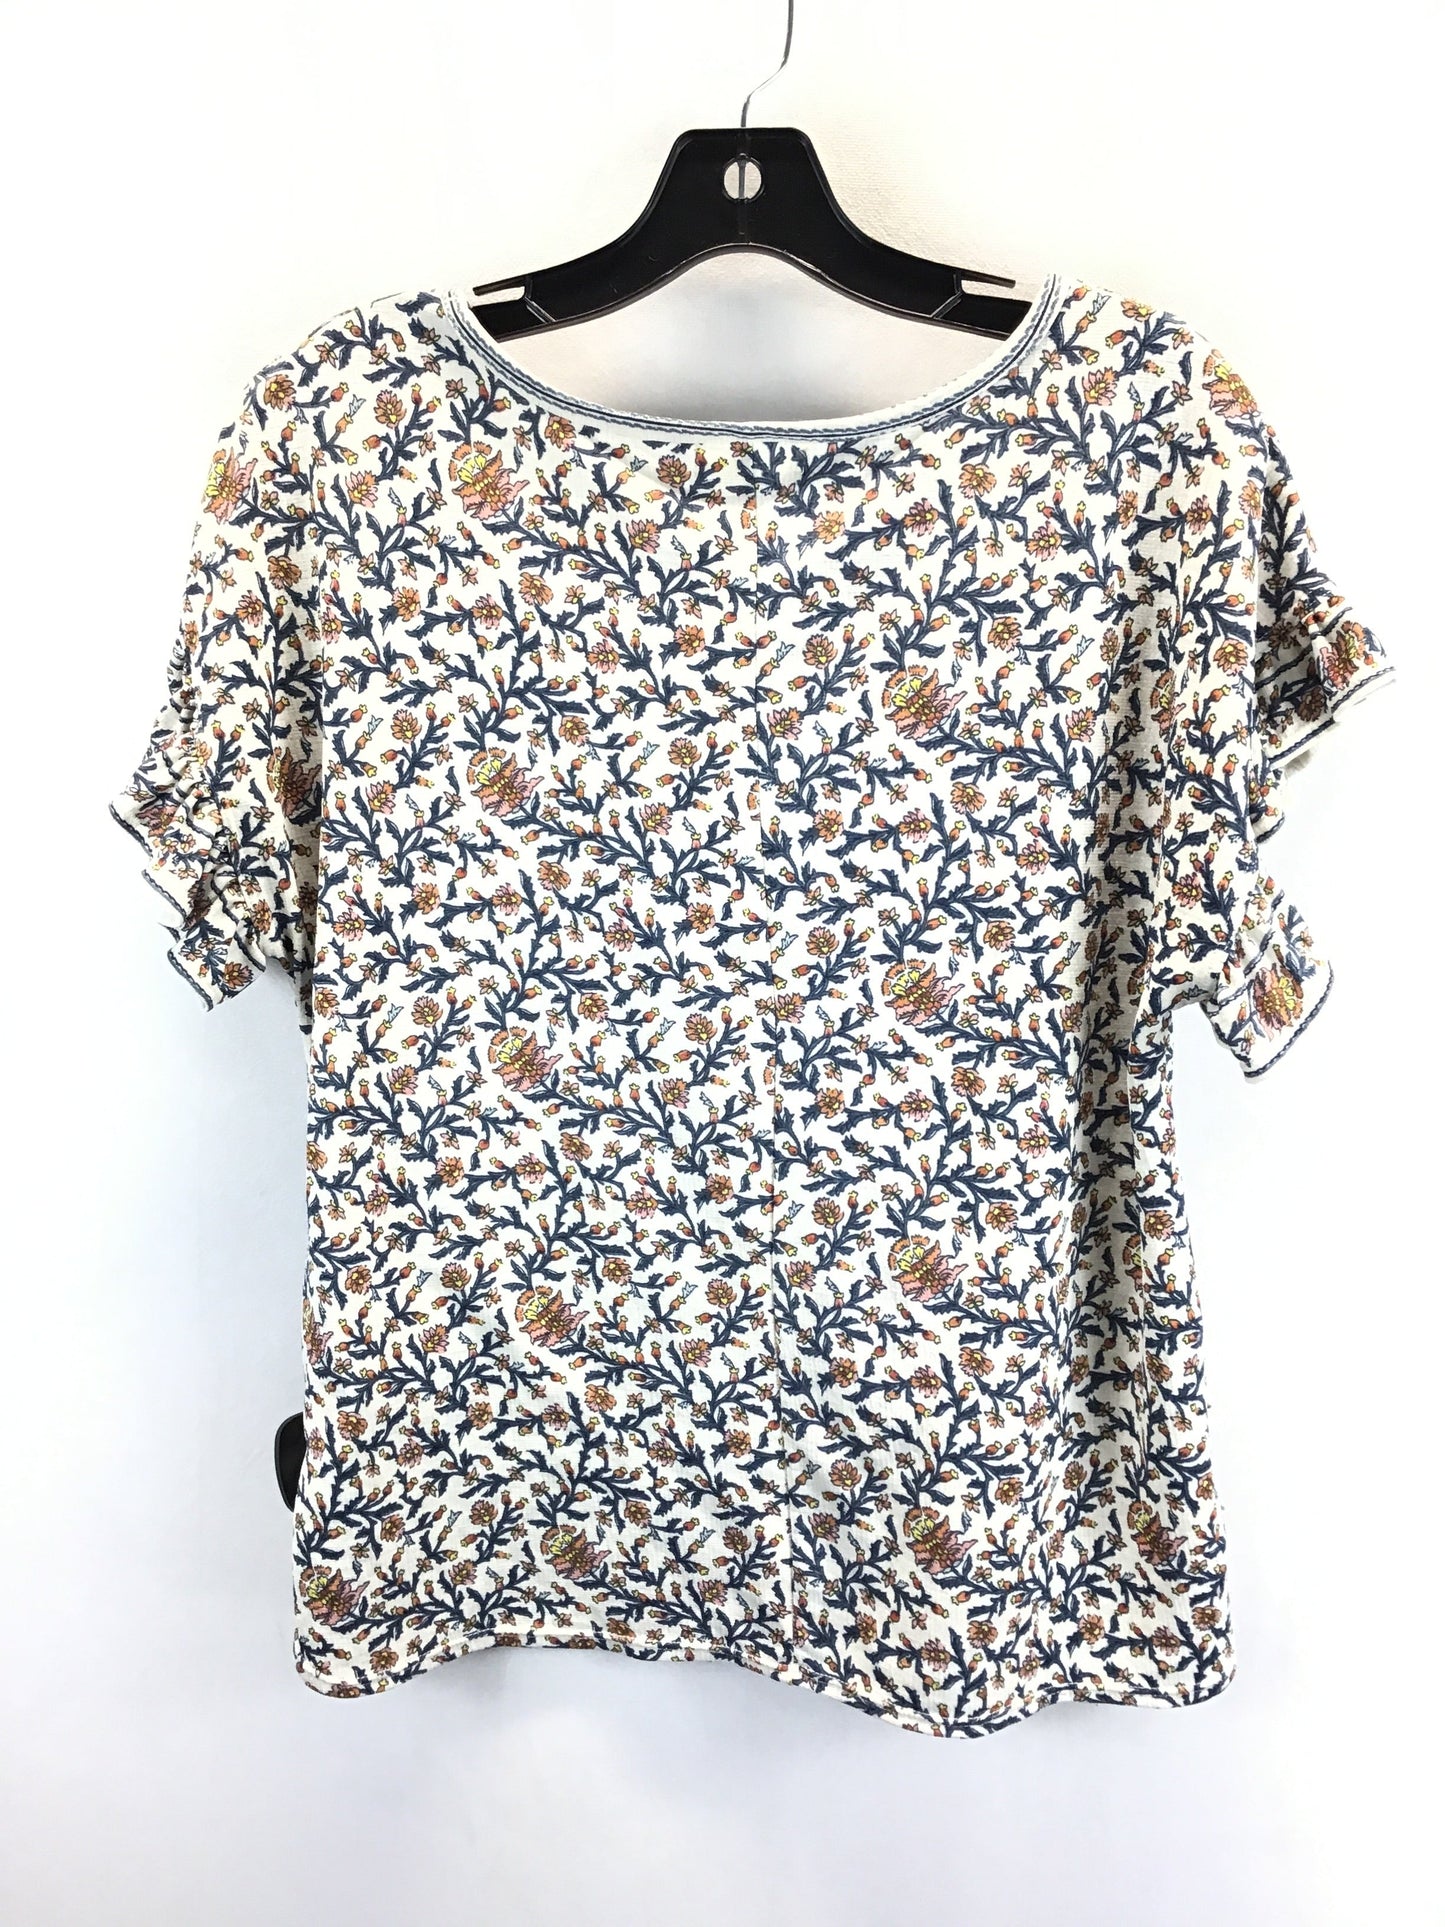 Floral Print Top Short Sleeve Max Studio, Size Xs